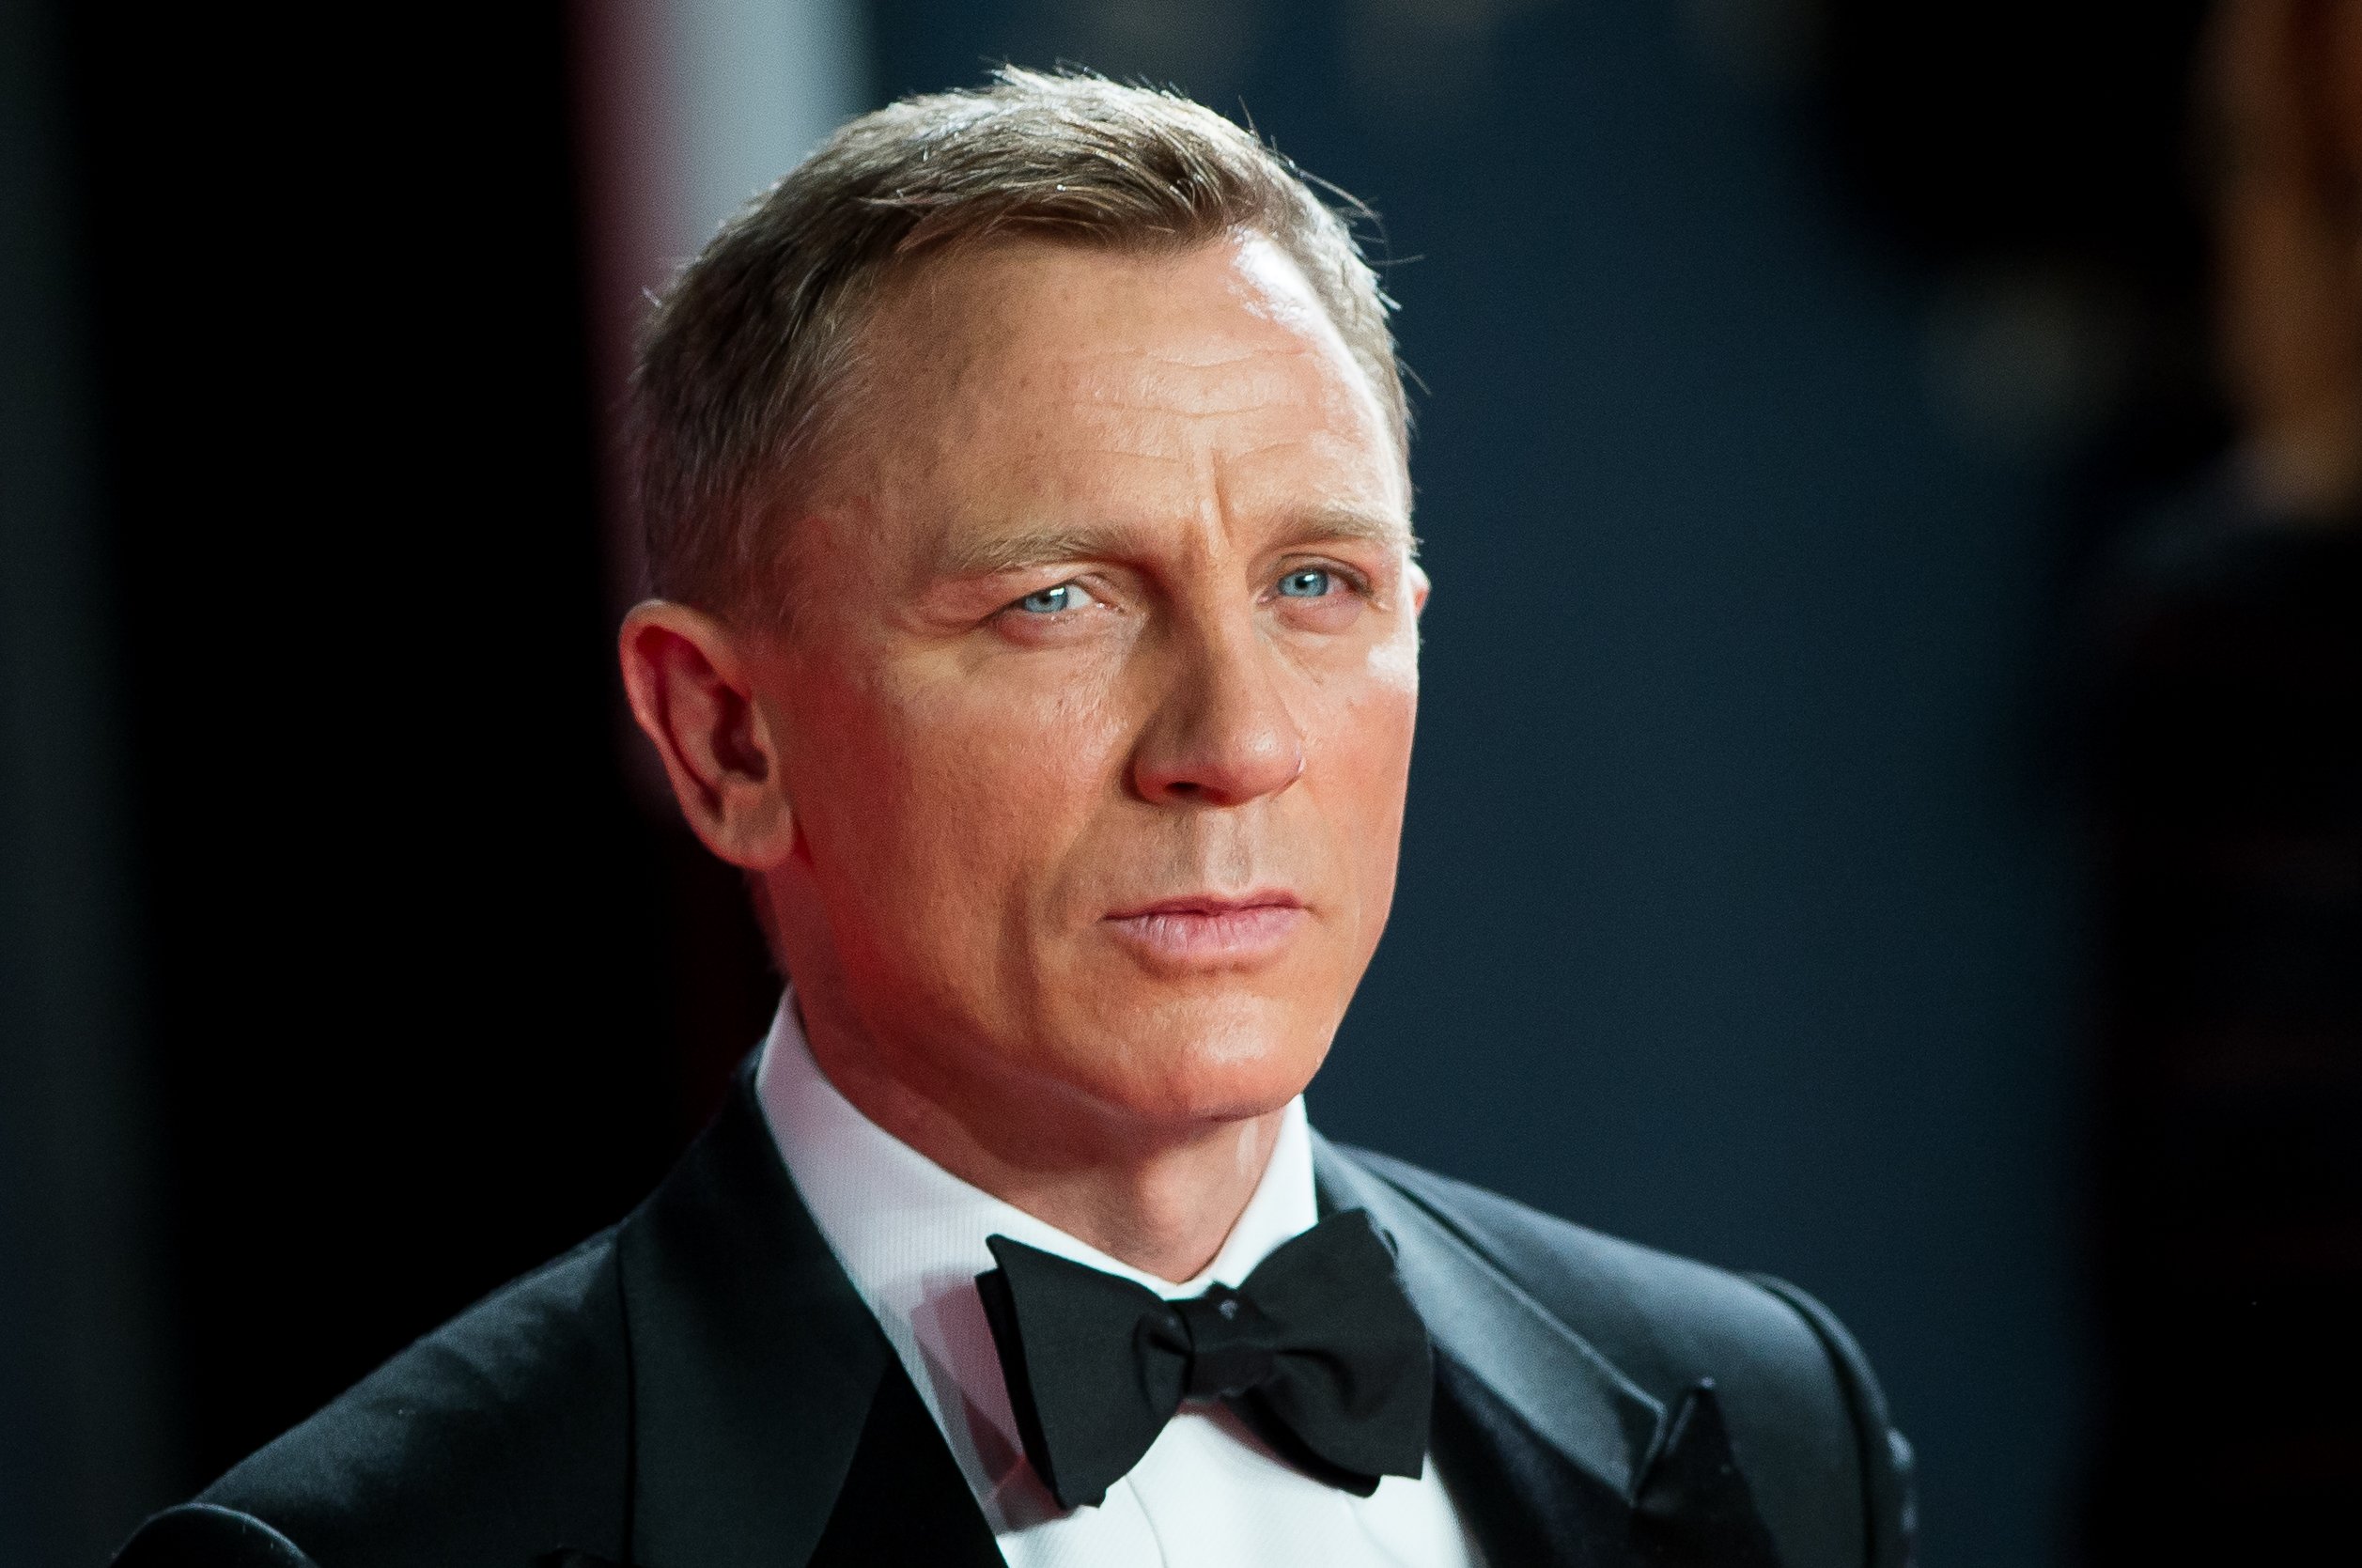 Daniel Craig during the Royal Film Performance of "Spectre" at Royal Albert Hall on October 26, 2015 in London, England. | Source: Getty Images